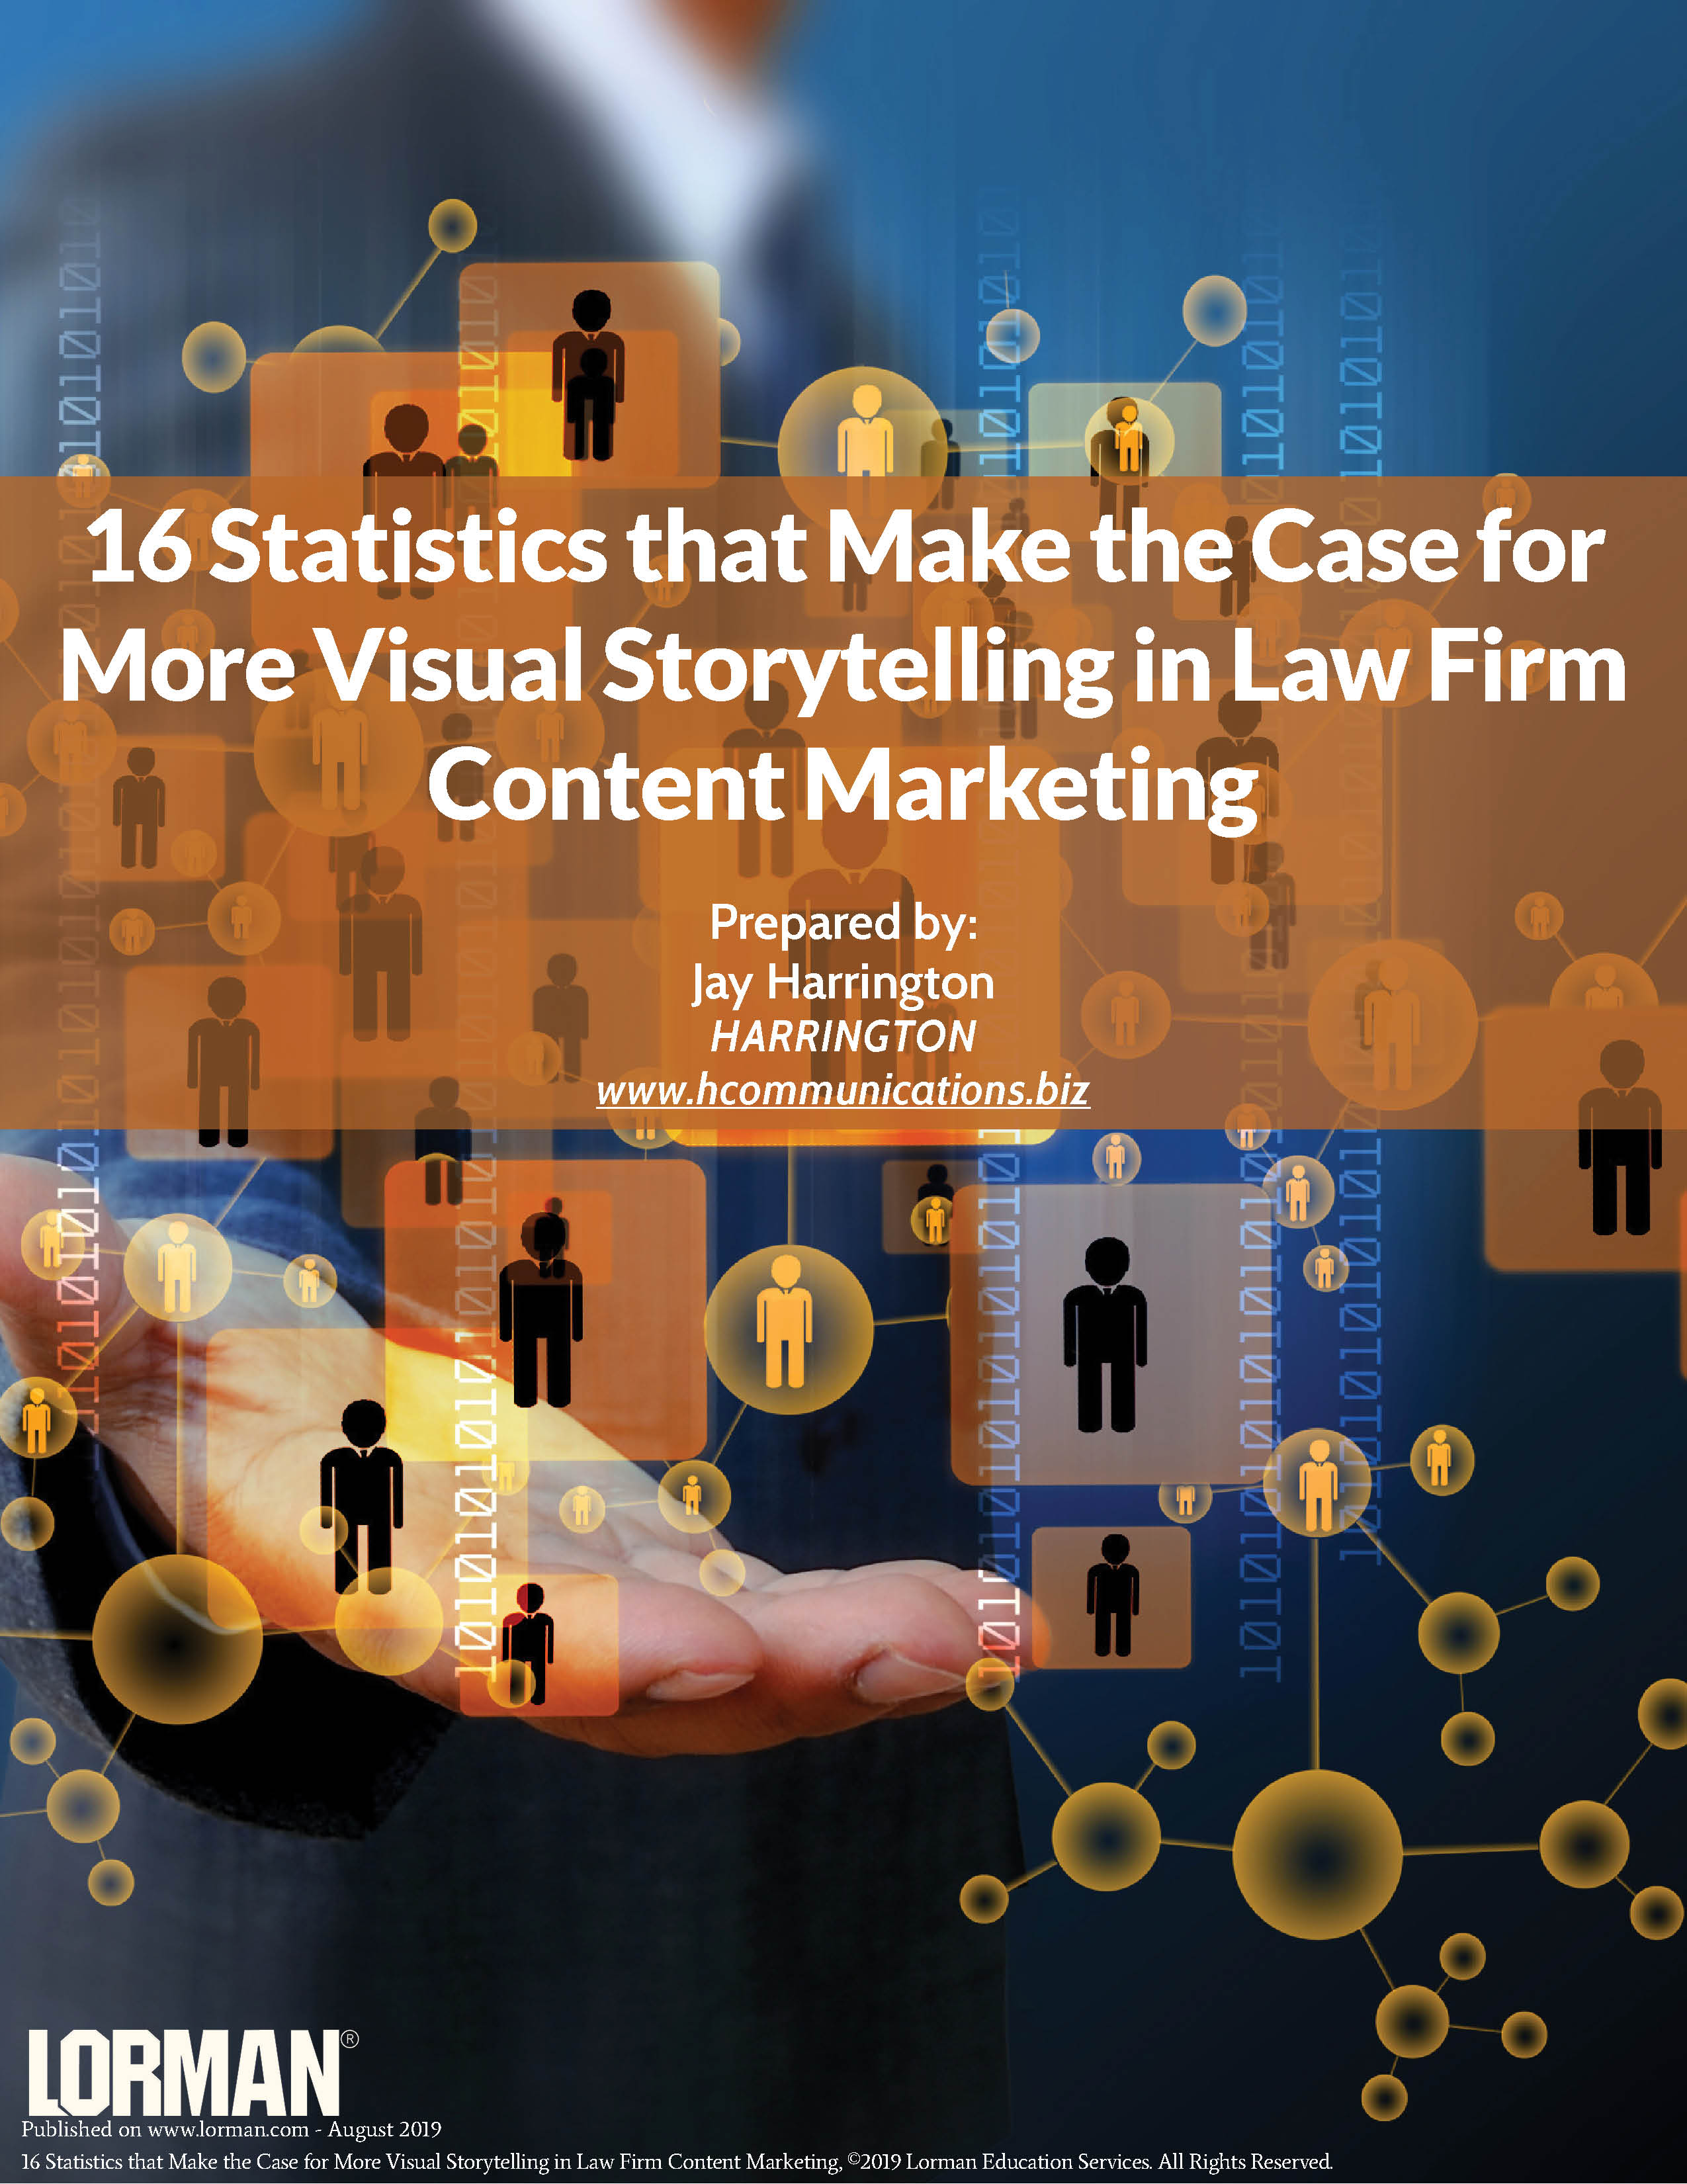 16 Statistics that Make the Case for More Visual Storytelling in Law Firm Content Marketing